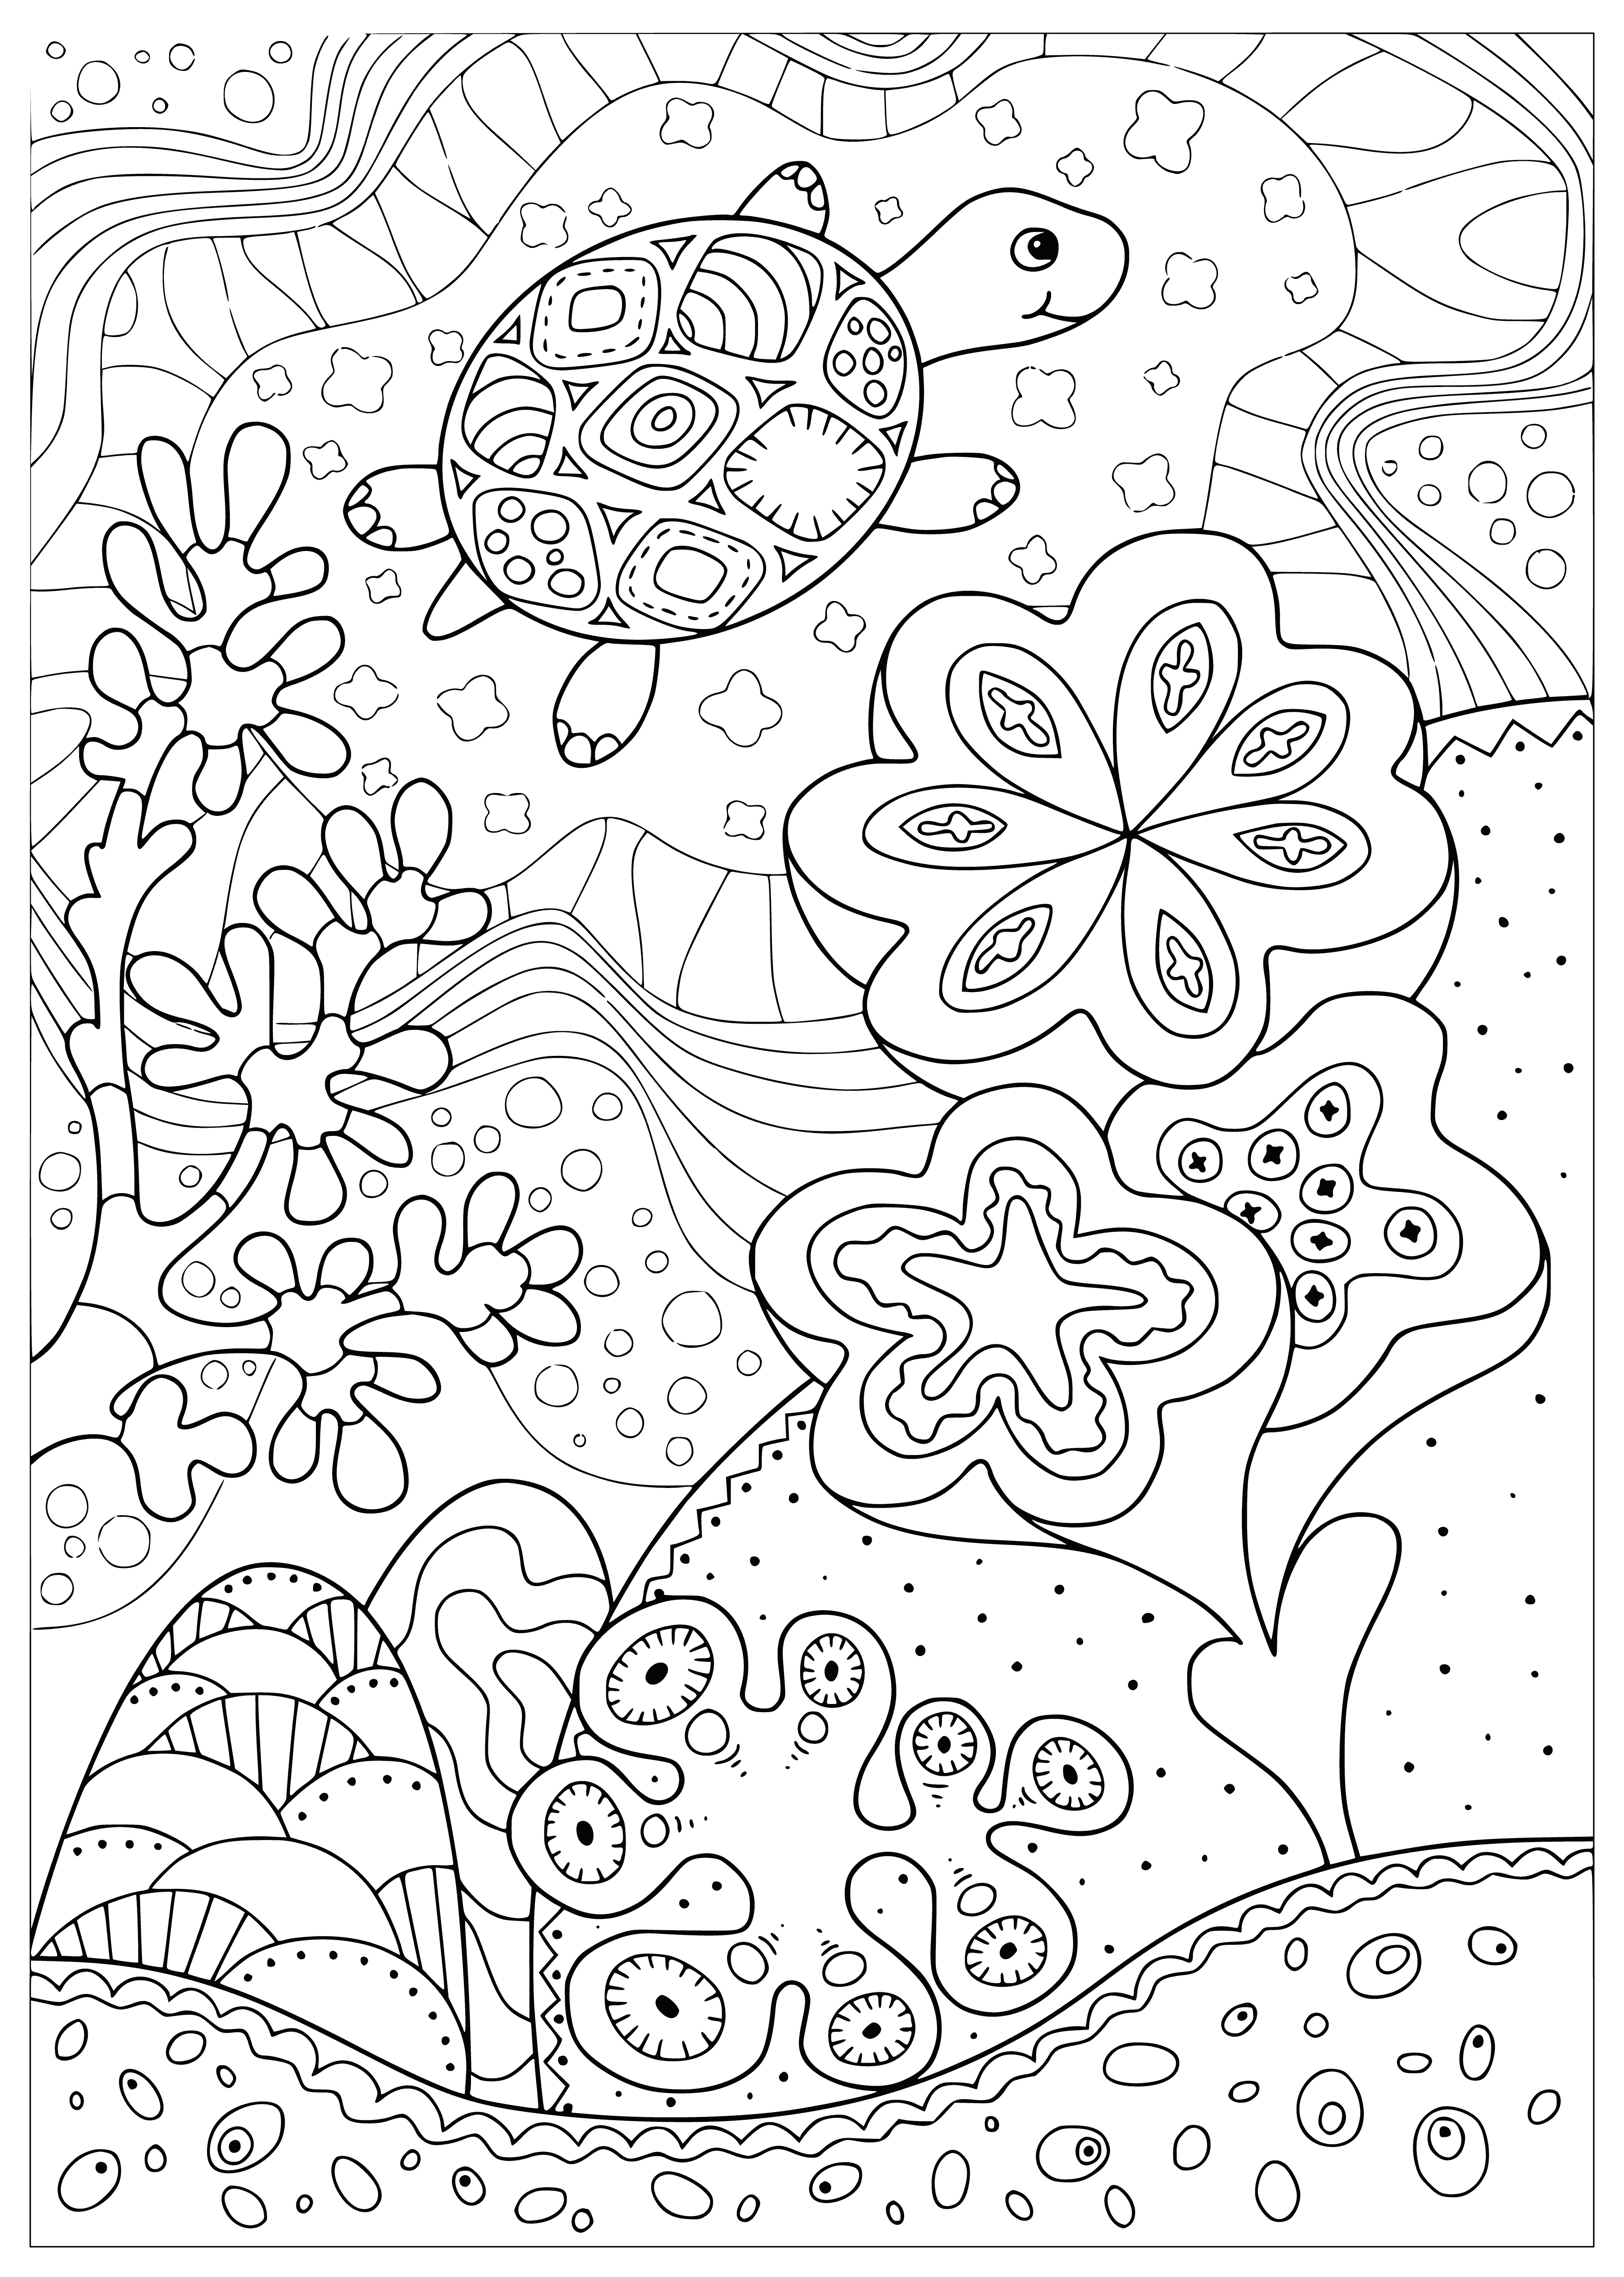 Turtle in a coral reef coloring page